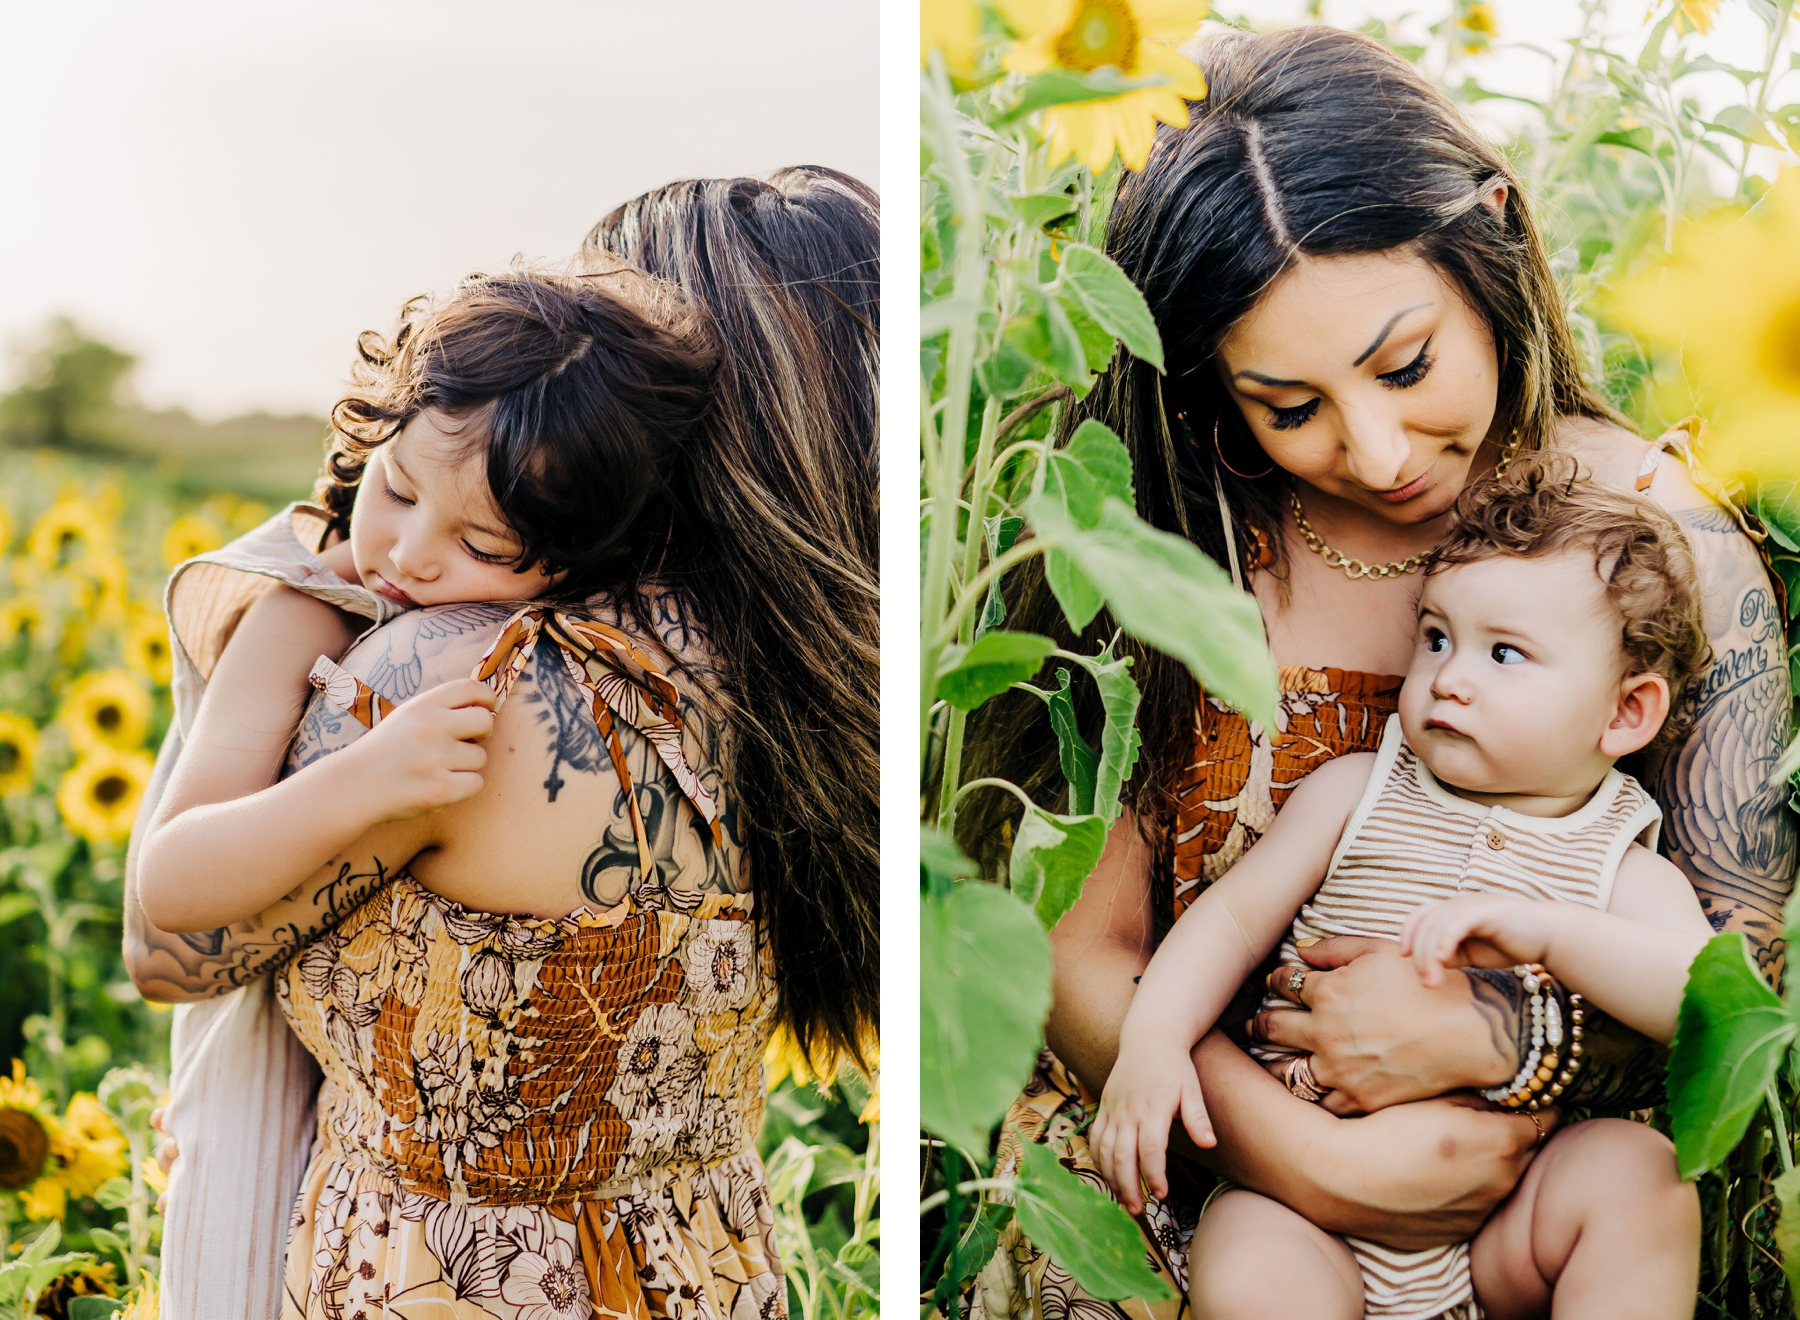 Mommy and me session in the sunflower fields at Green Valley Gardens in North Dallas, Texas. | Dallas Family Photographer | Green Valley Gardens 